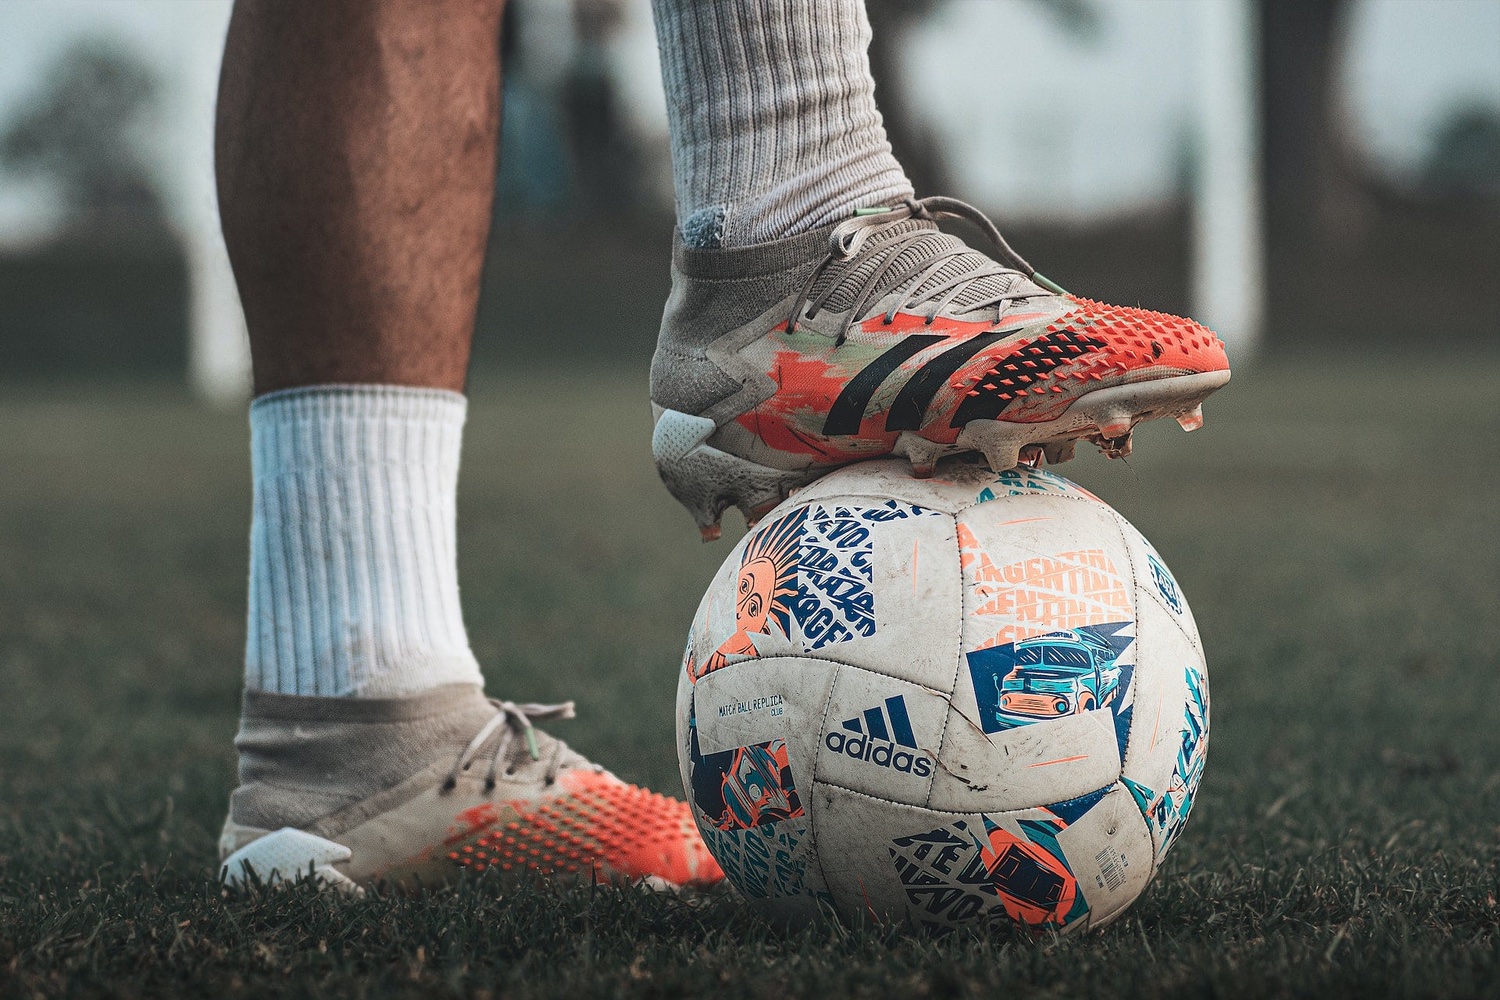 Soccer with diabetes: Find out how to practice it safely